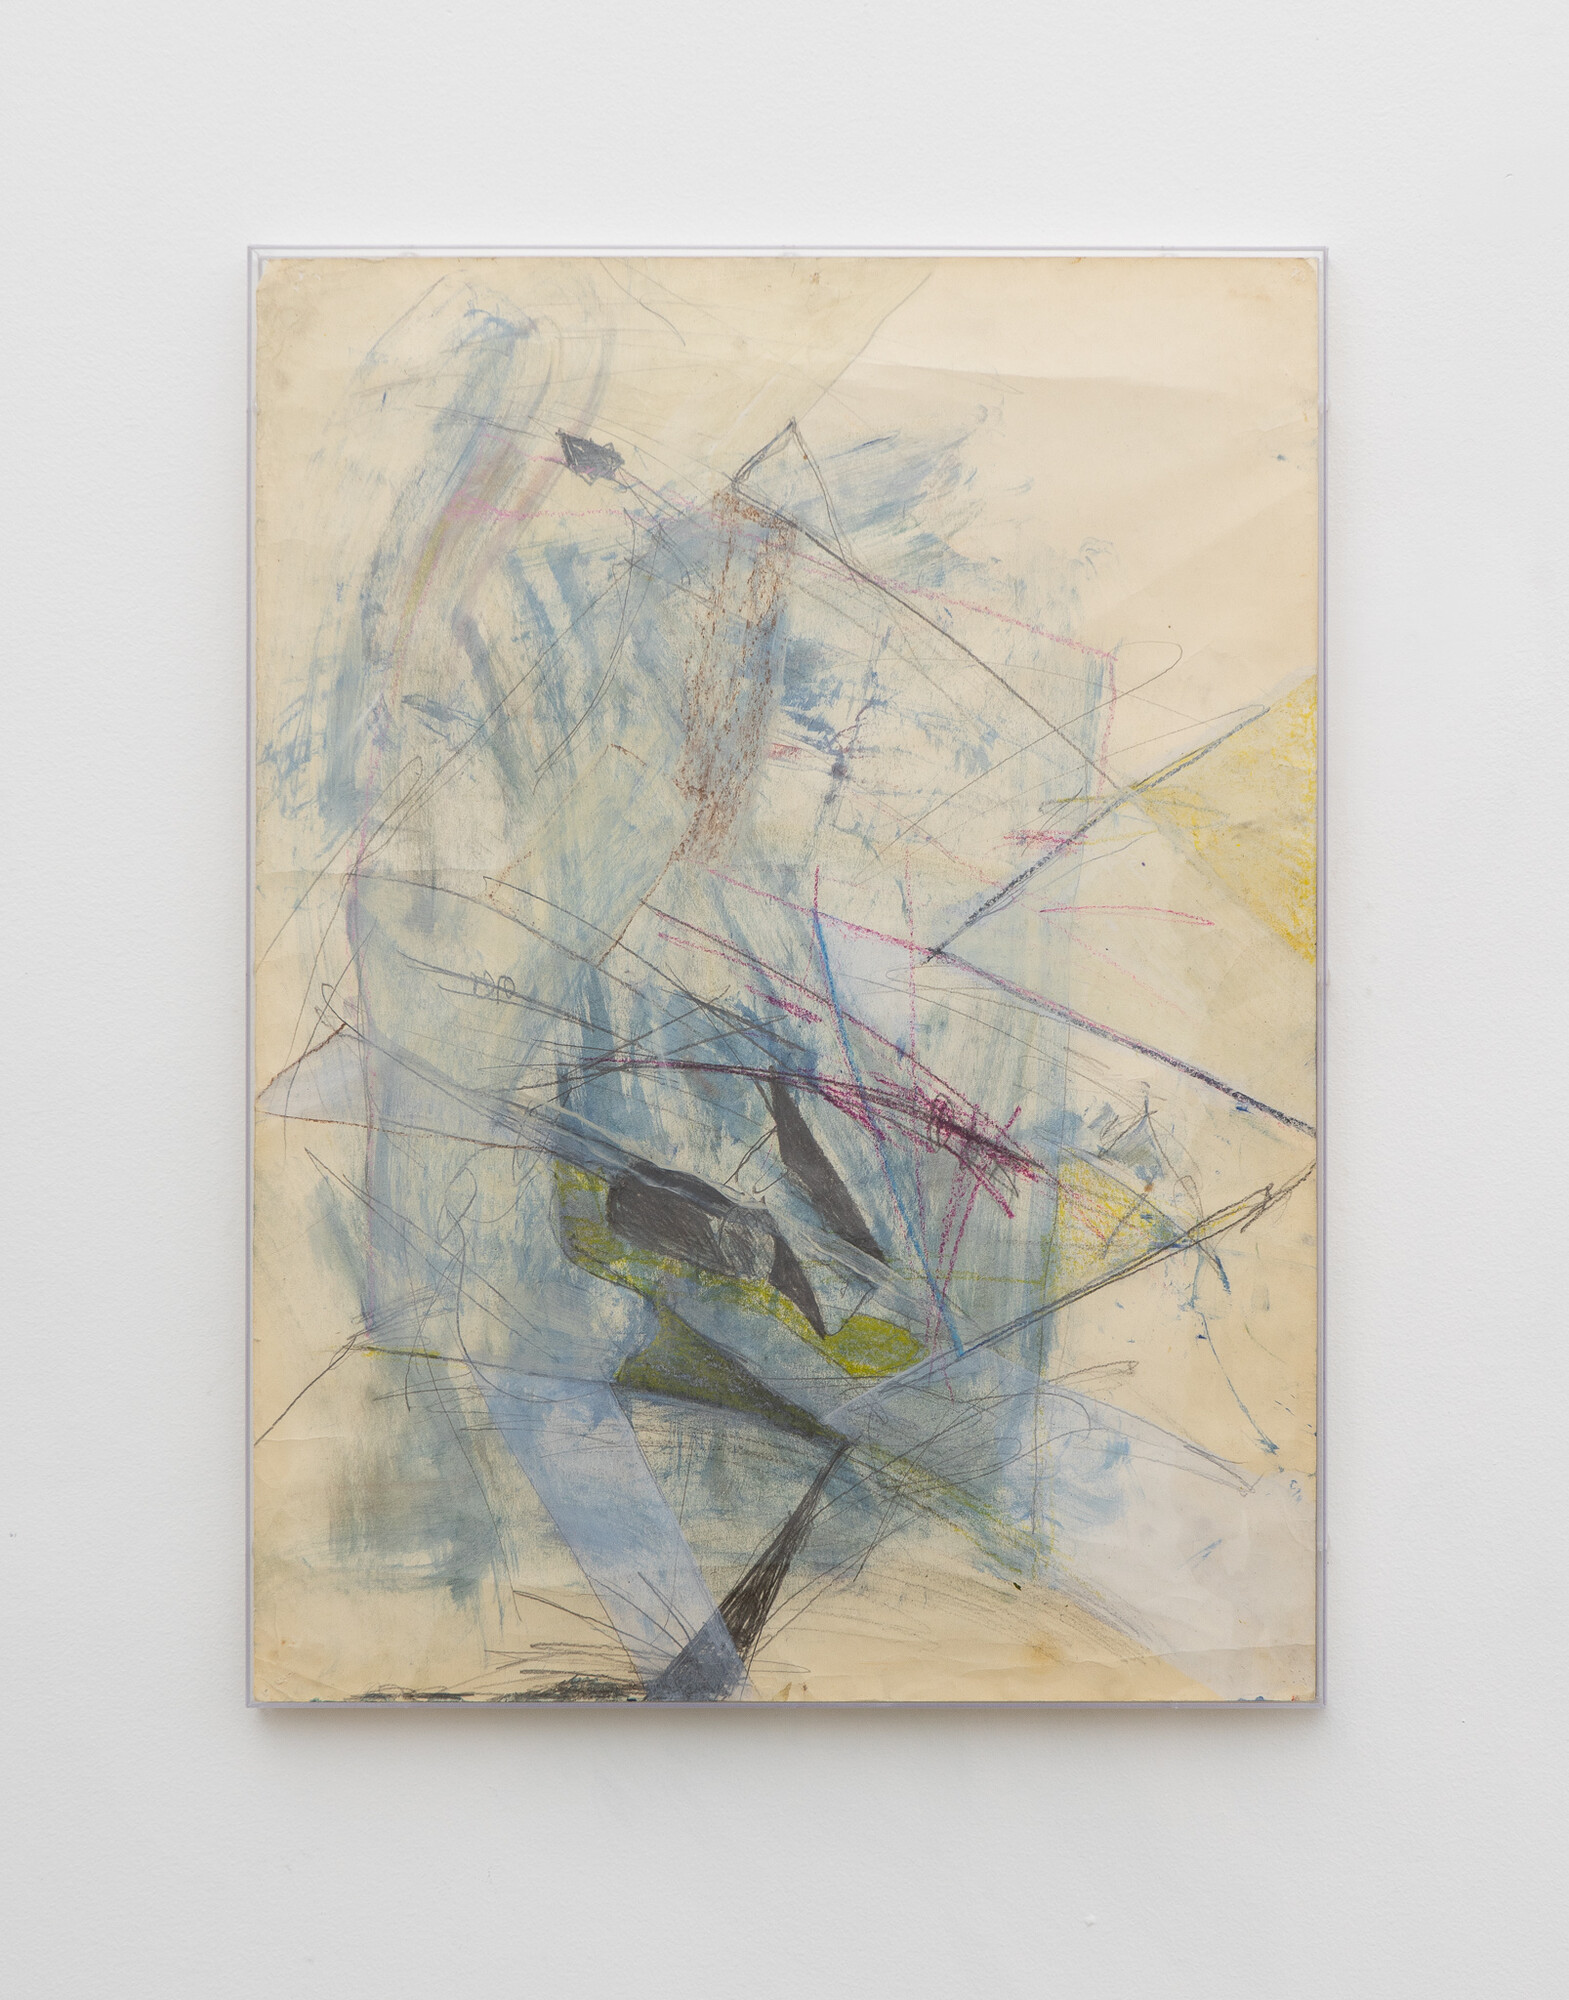 Lou Hubbard, <em>Blue</em>, 1976, oil pastel, crayon, acrylic and graphite on paper acrylic frame, 77 x 57cm. Photo courtesy of Savage Garden.